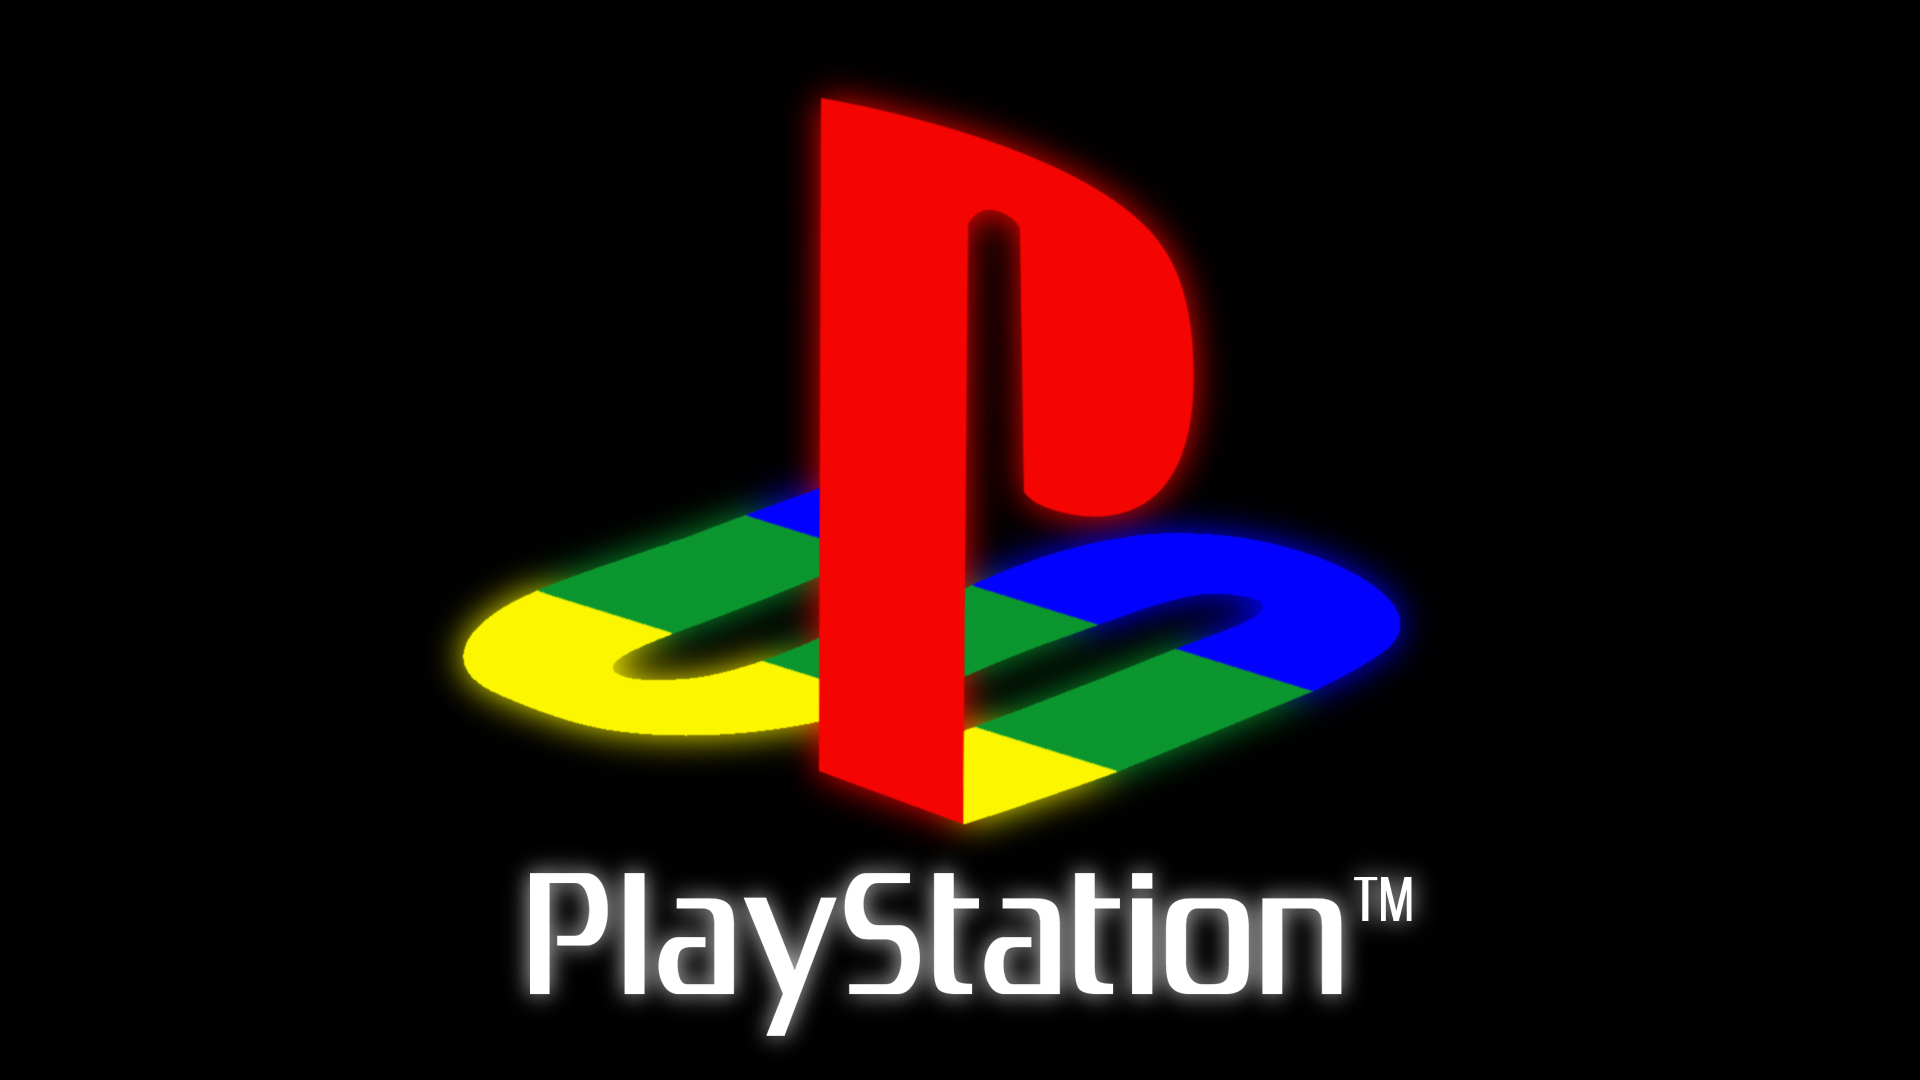 The Sony PlayStation Brand Is Behind Some Of The Most Popular Gaming Franchises | Image Source: DeviantArt